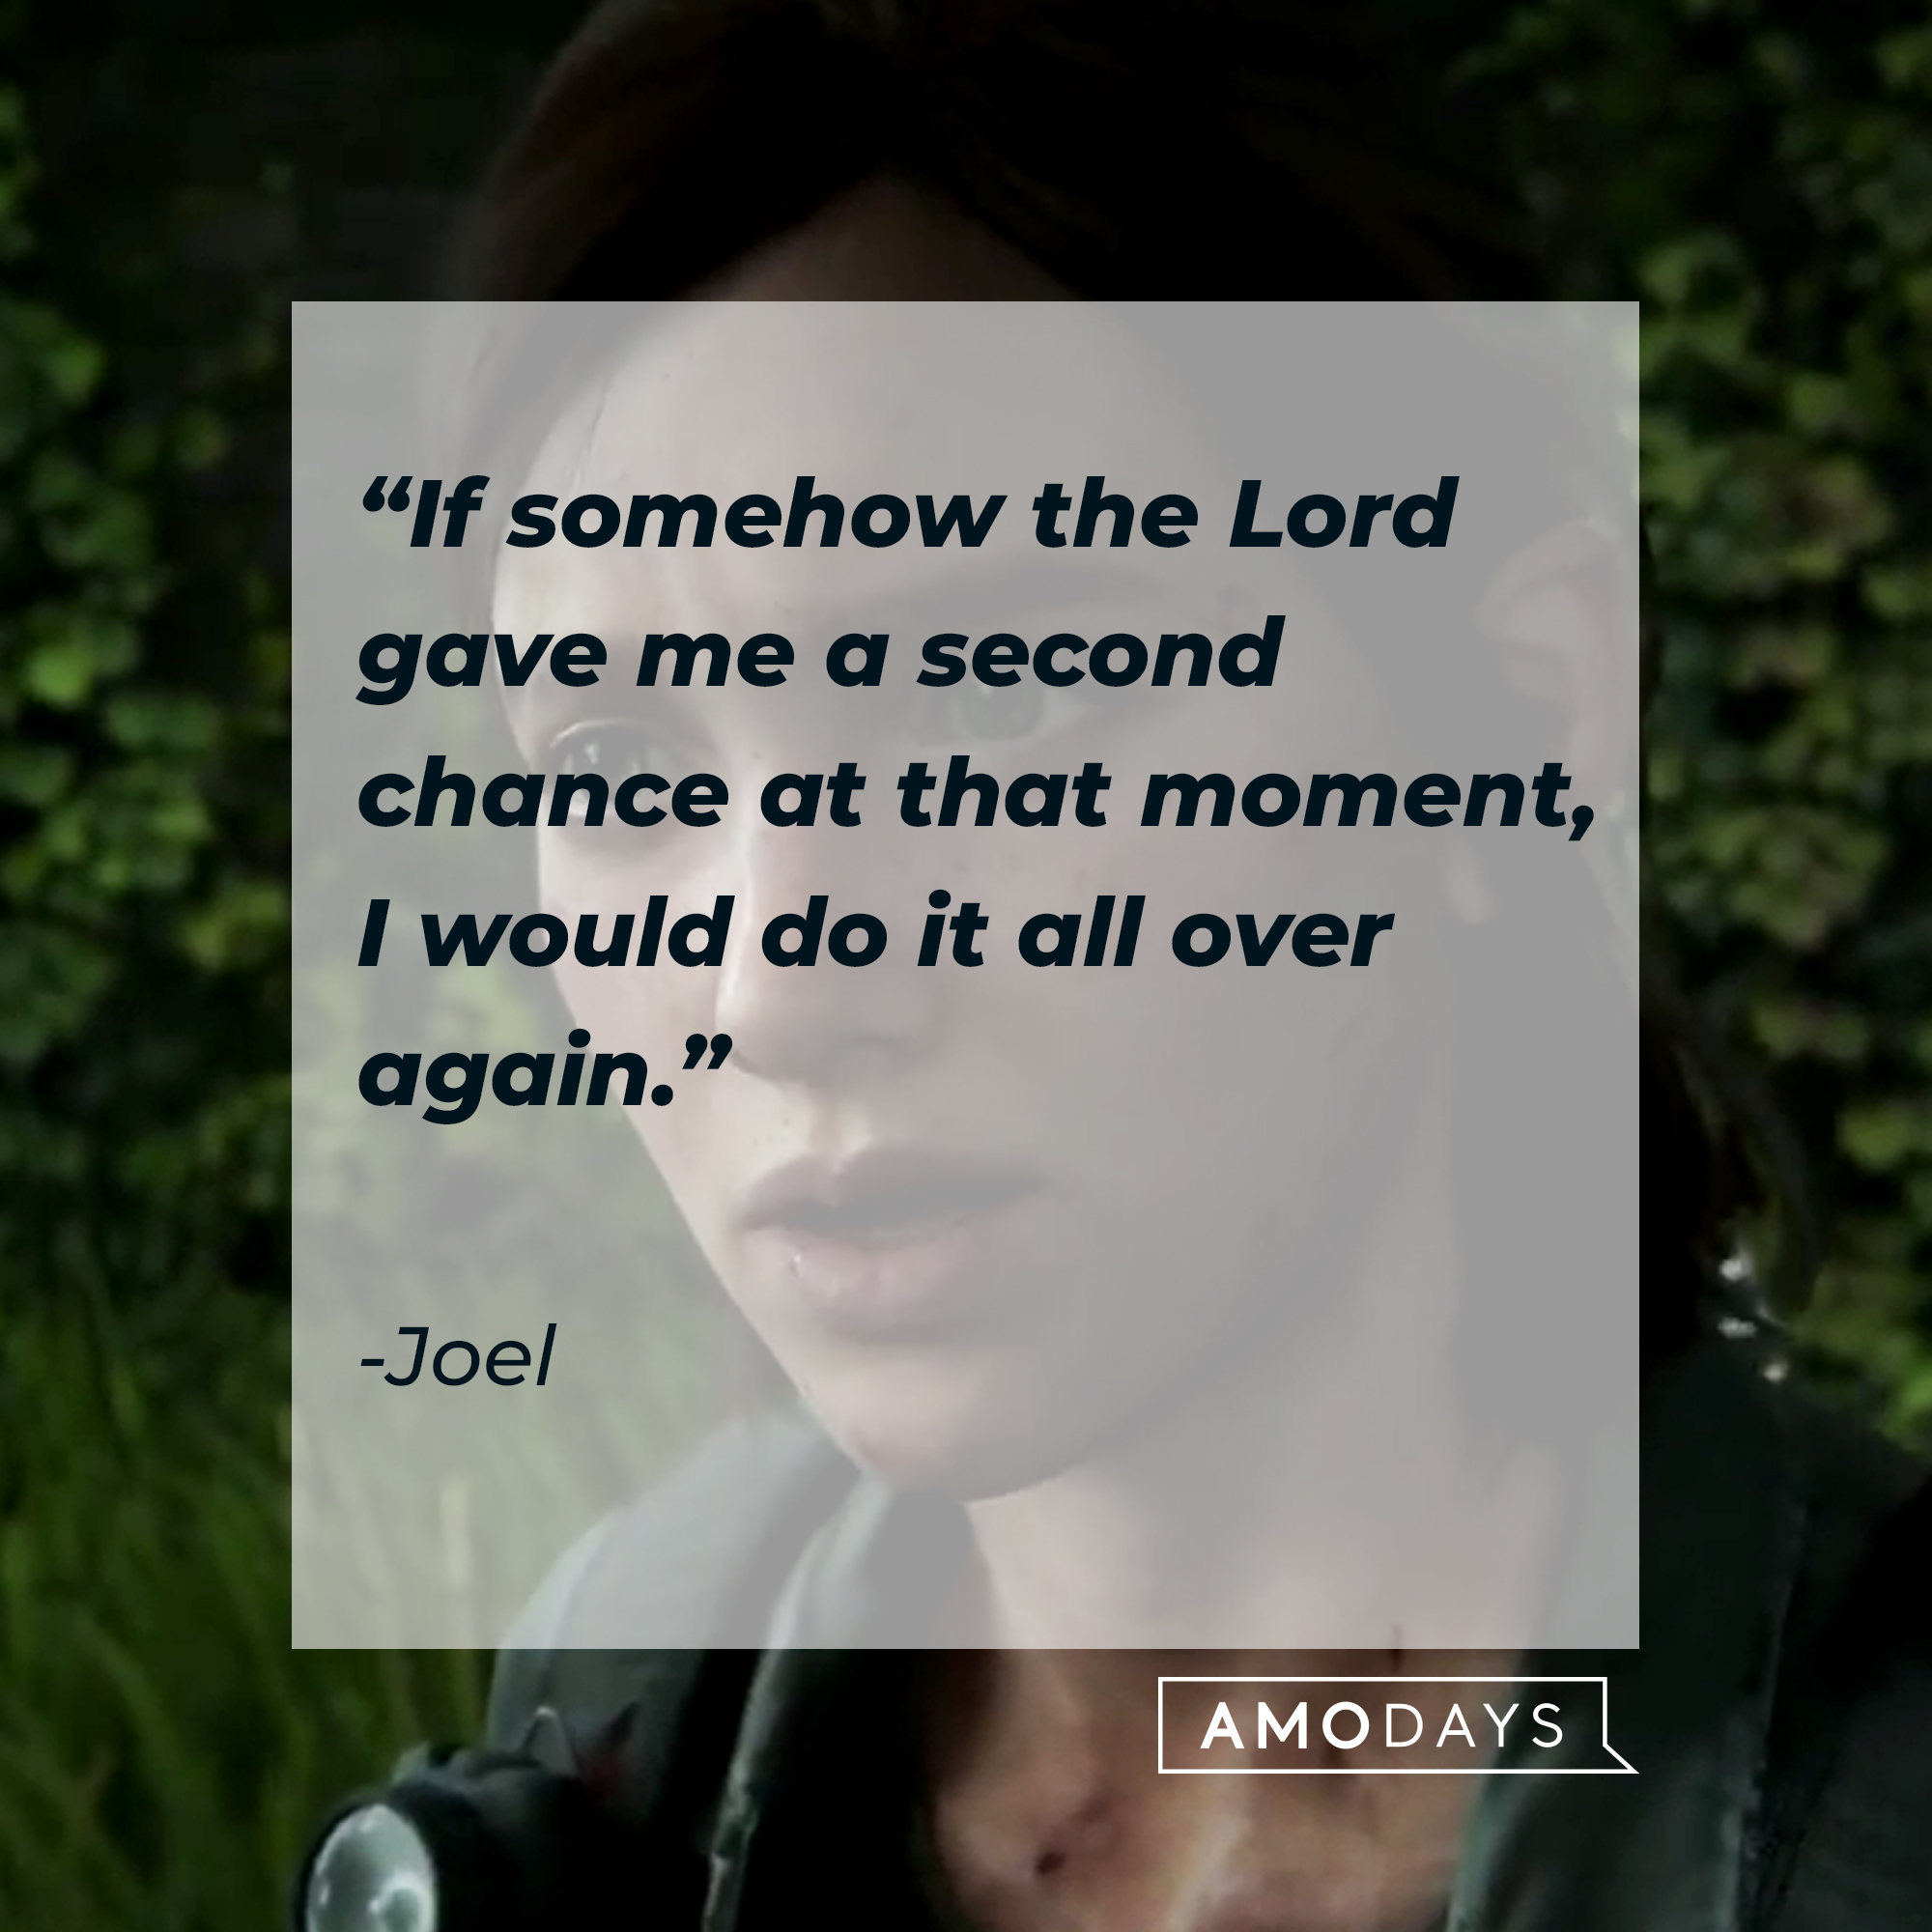 An image of Ellie, with Joel’s quote: "If somehow the Lord gave me a second chance at that moment, I would do it all over again."  | Source: Facebook.com/TLOUPS